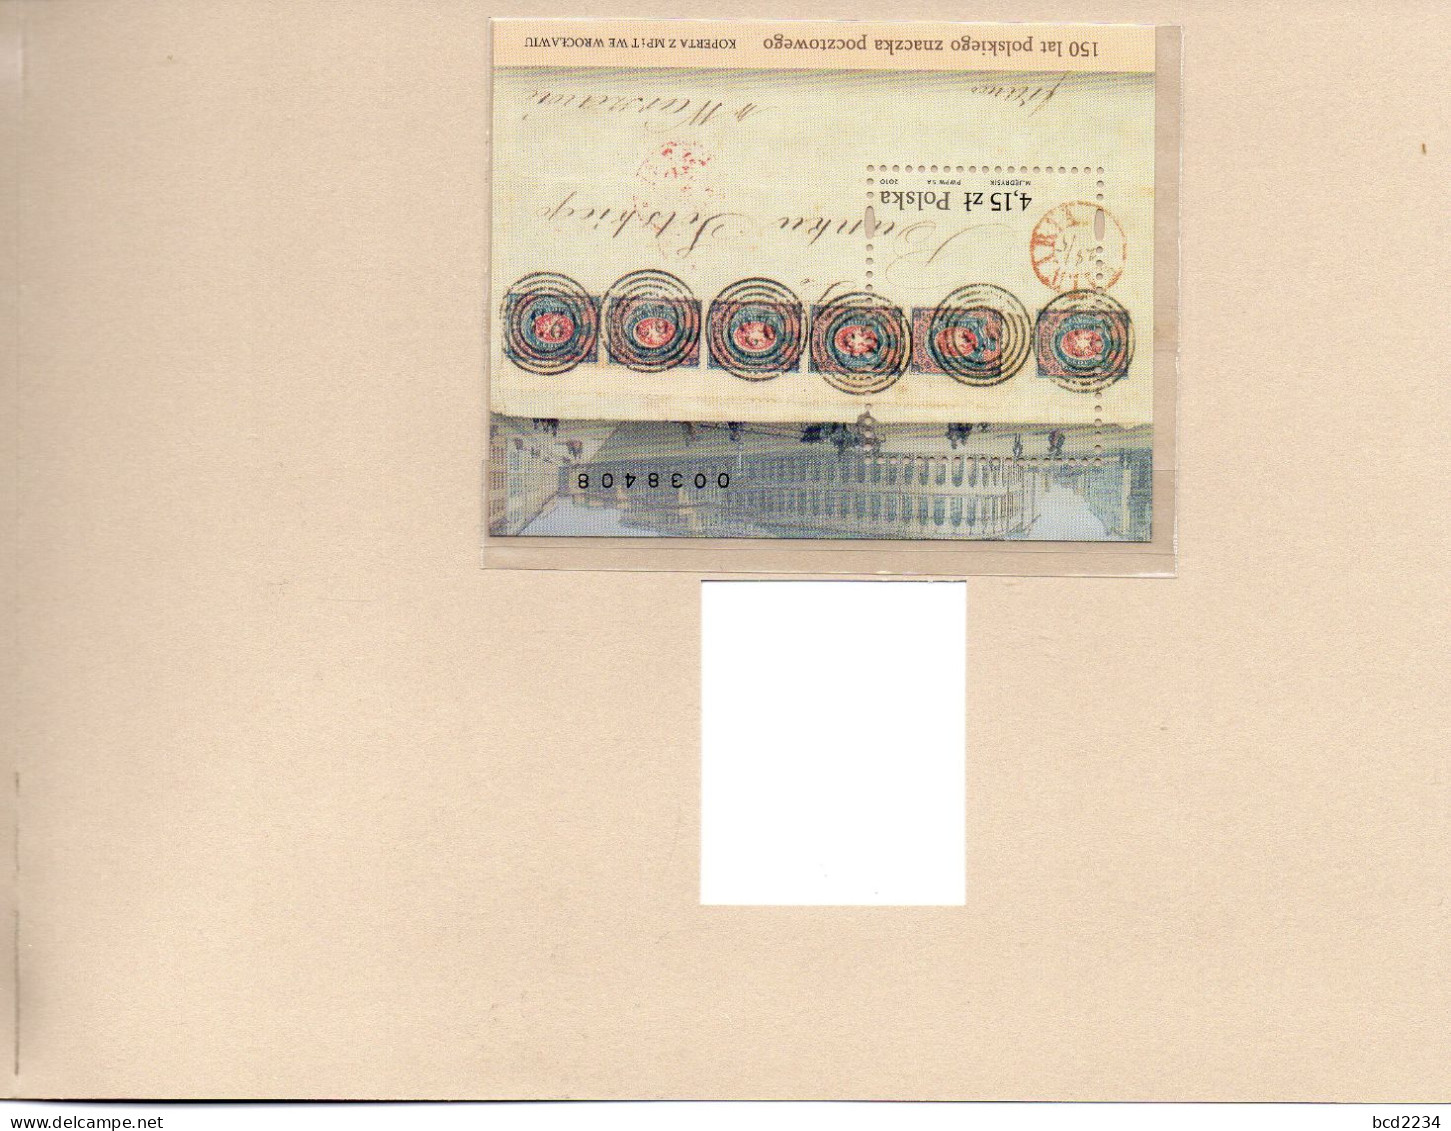 POLAND 2010 POLISH POST OFFICE LIMITED EDITION FOLDER: 150 YEARS ANNIVERSARY 1860 FIRST POLISH STAMP FDC & MS & ENVELOPE - Storia Postale